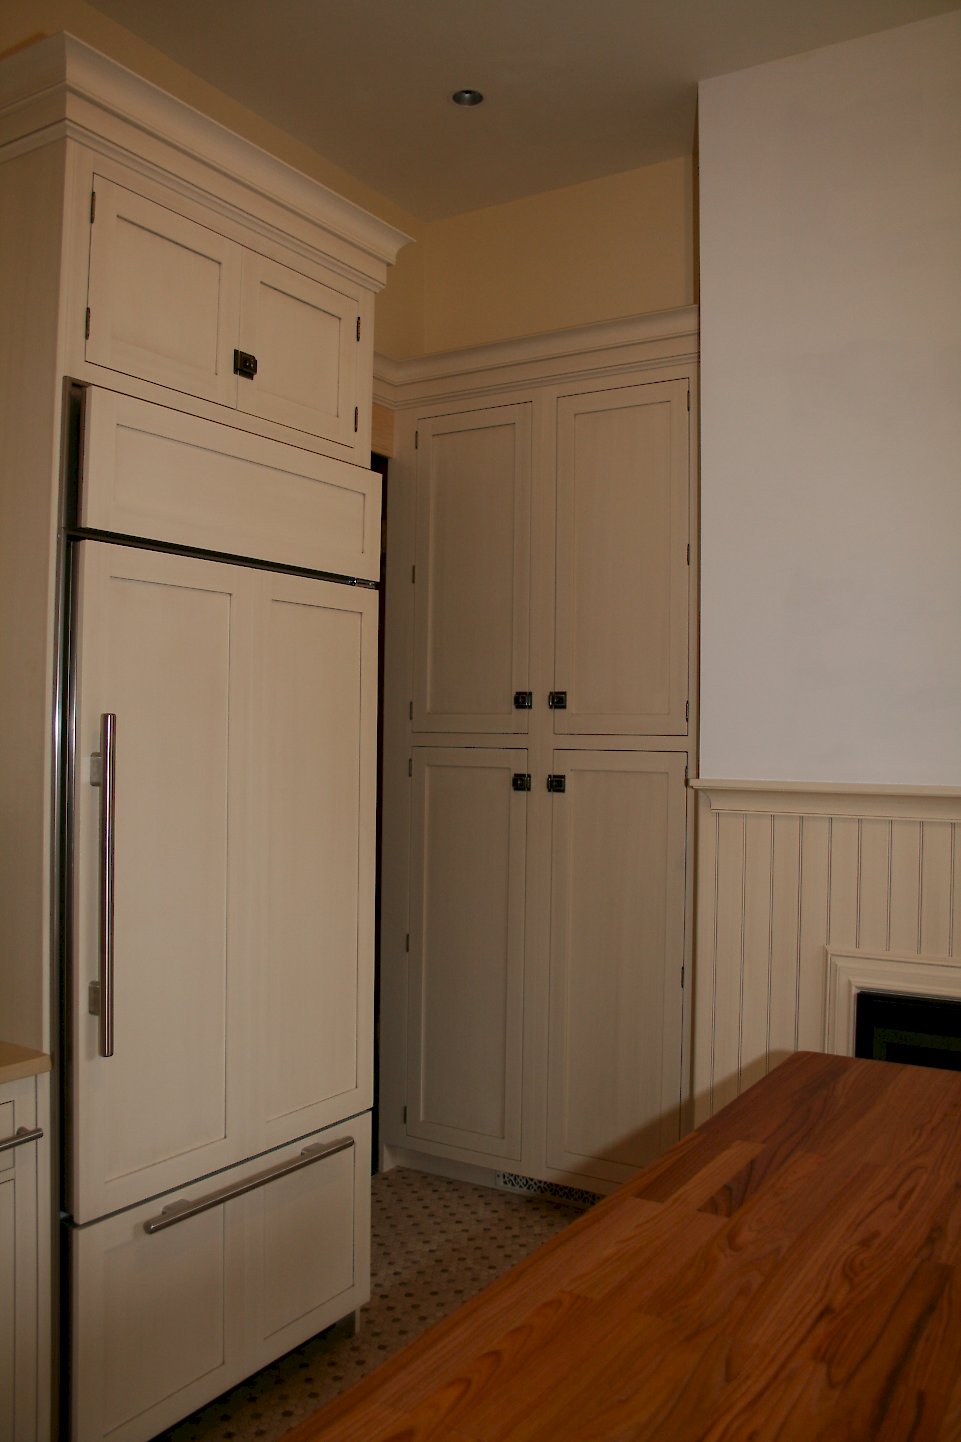 Tall pantry unit built into the wall.